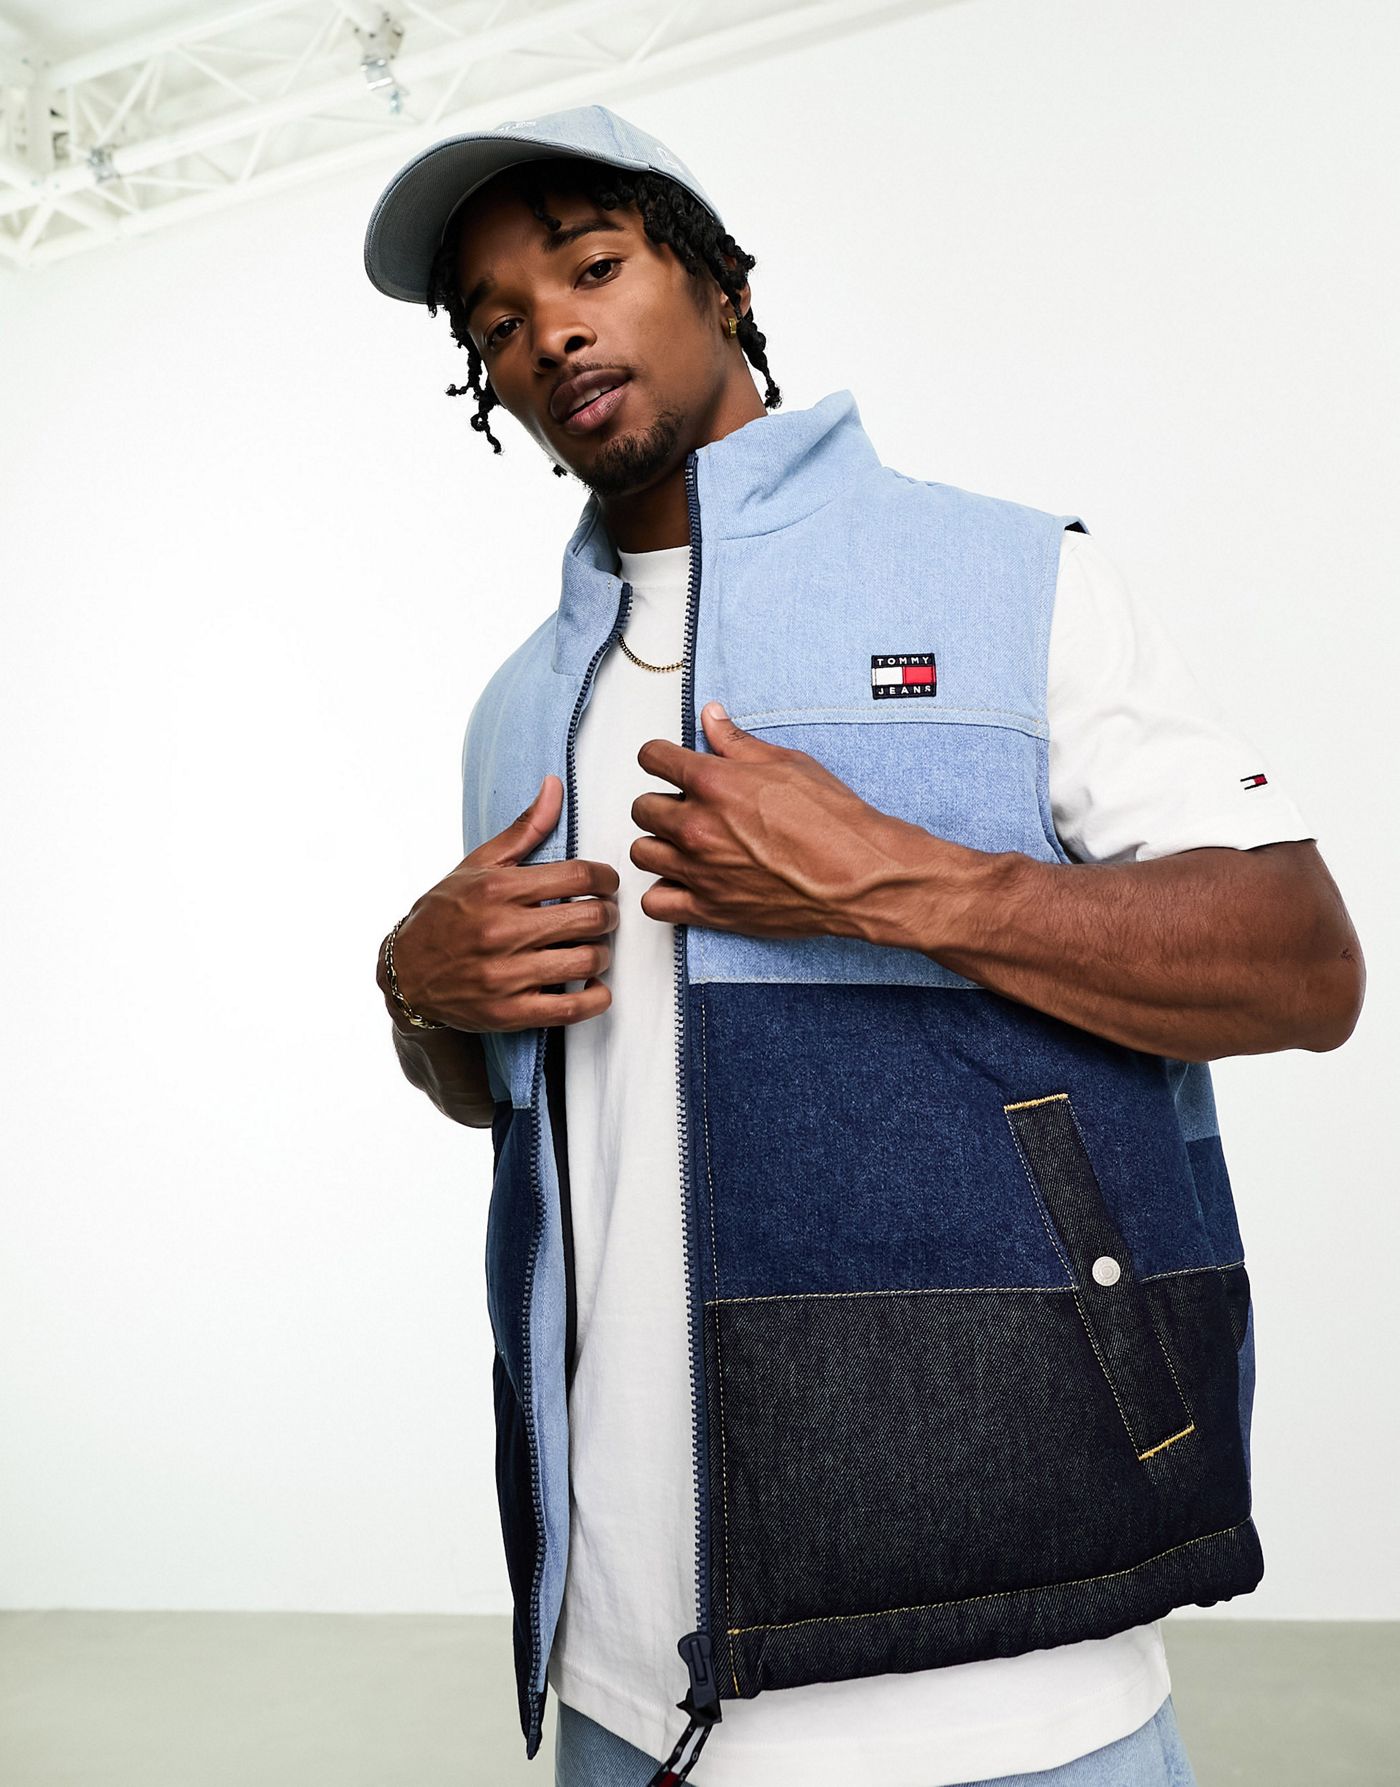 Tommy Jeans archive puffer vest in denim